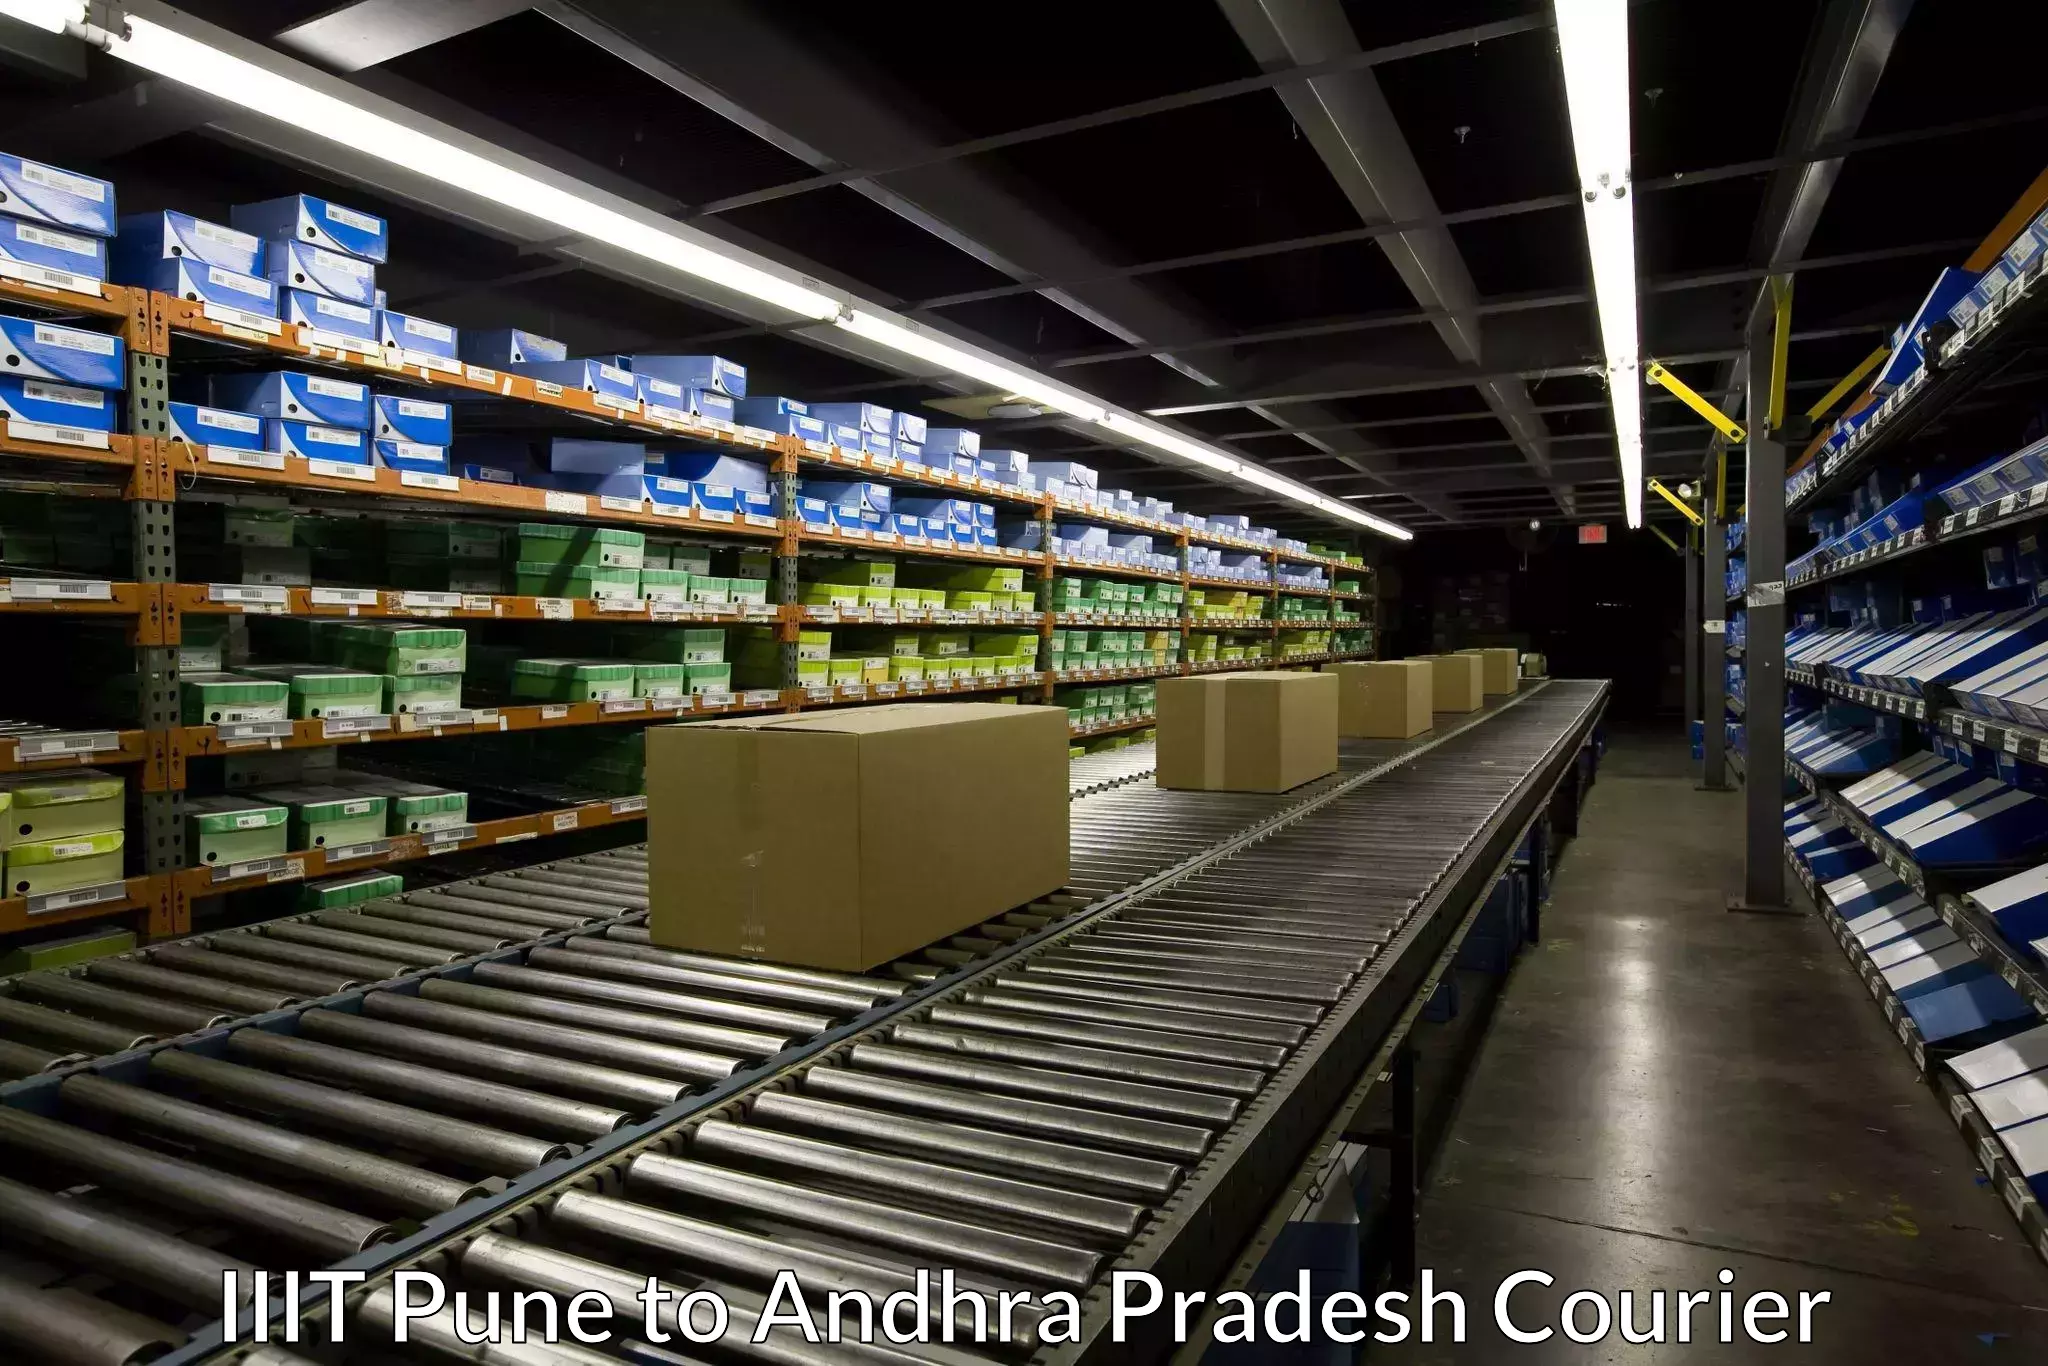 State-of-the-art courier technology IIIT Pune to Pulivendula